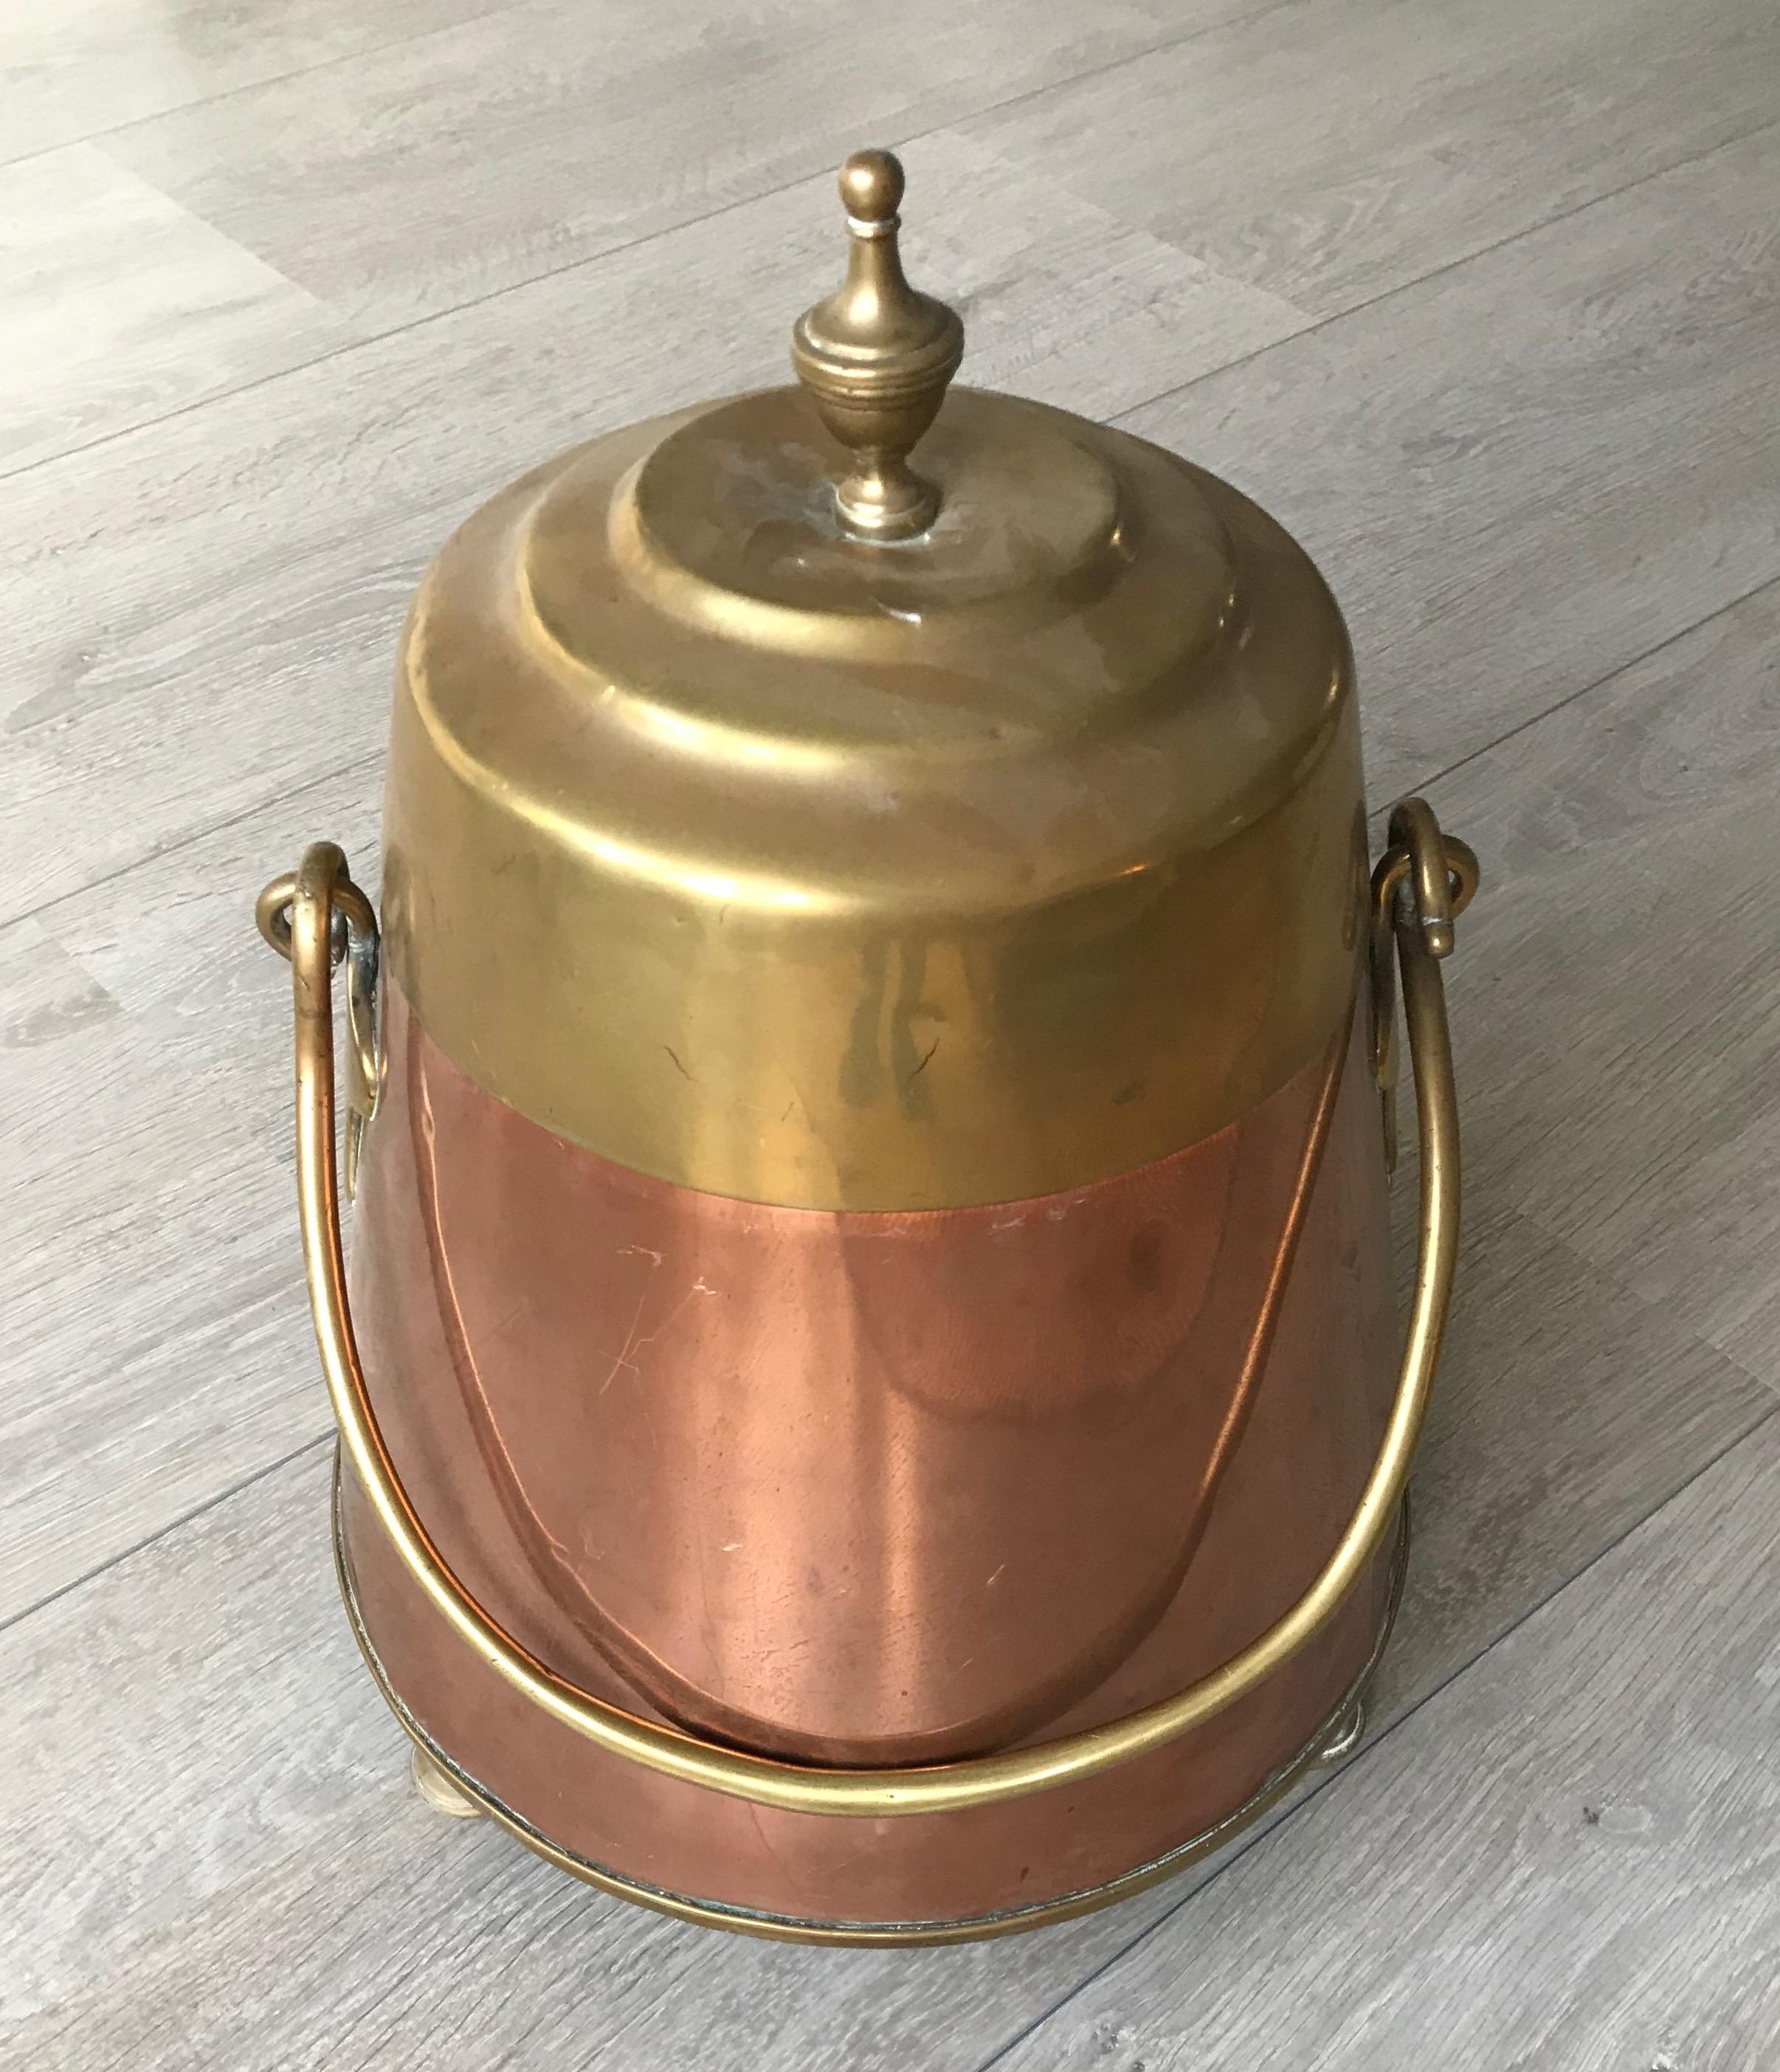 Polished Antique Stylish Copper and Brass Coal Kettle, Fire Extinguisher Fire Place Decor For Sale